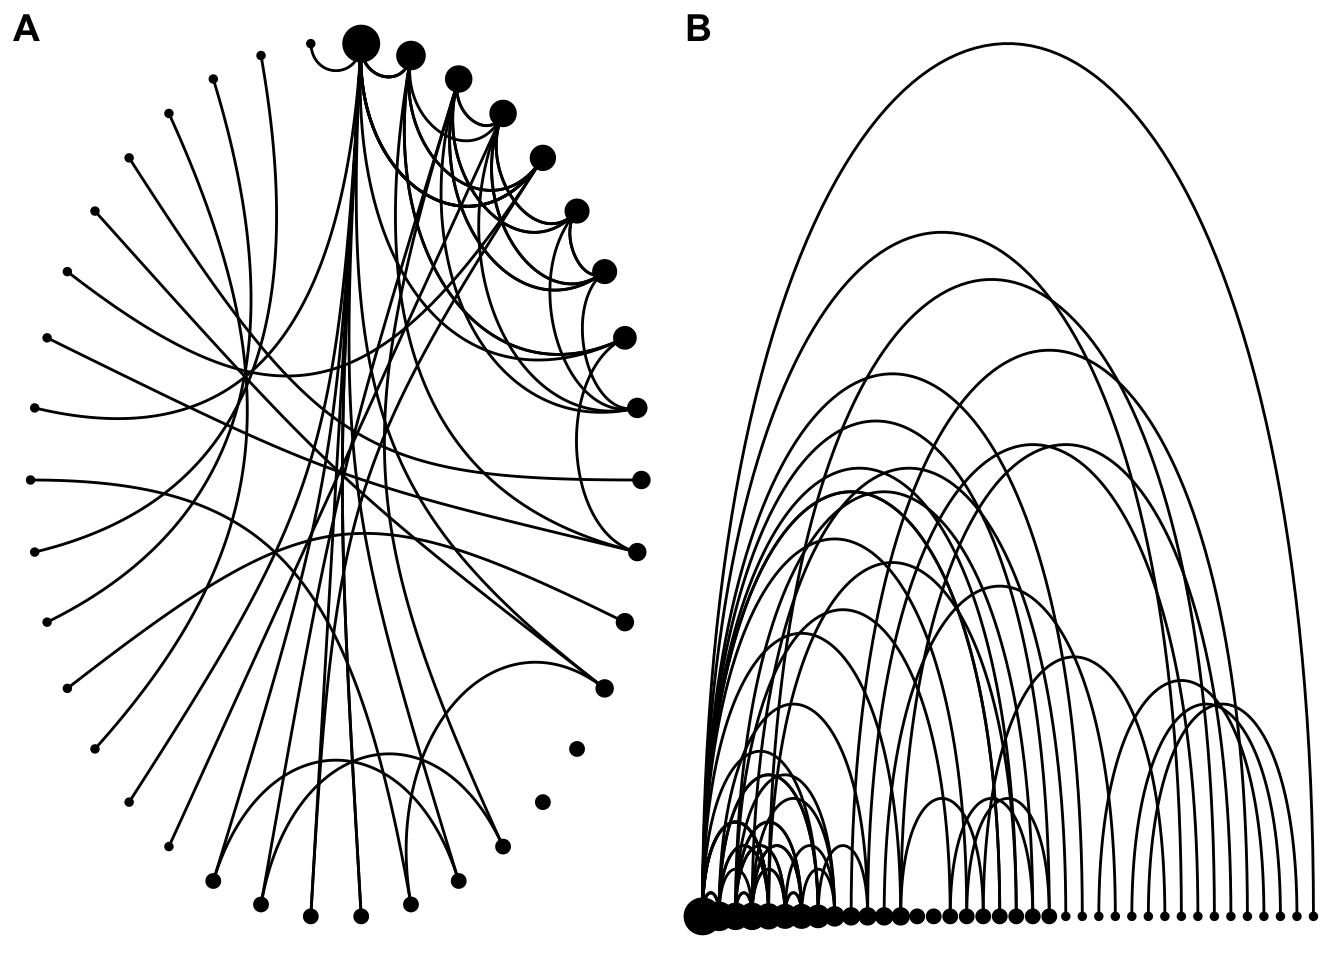 Two network graphs of the same data. One is labelled 'A' and is arranged with nodes around the edge of a circle. The other, labelled 'B' has nodes arranged along a line with arcs joining them. Most nodes have only one connection, up to about 20